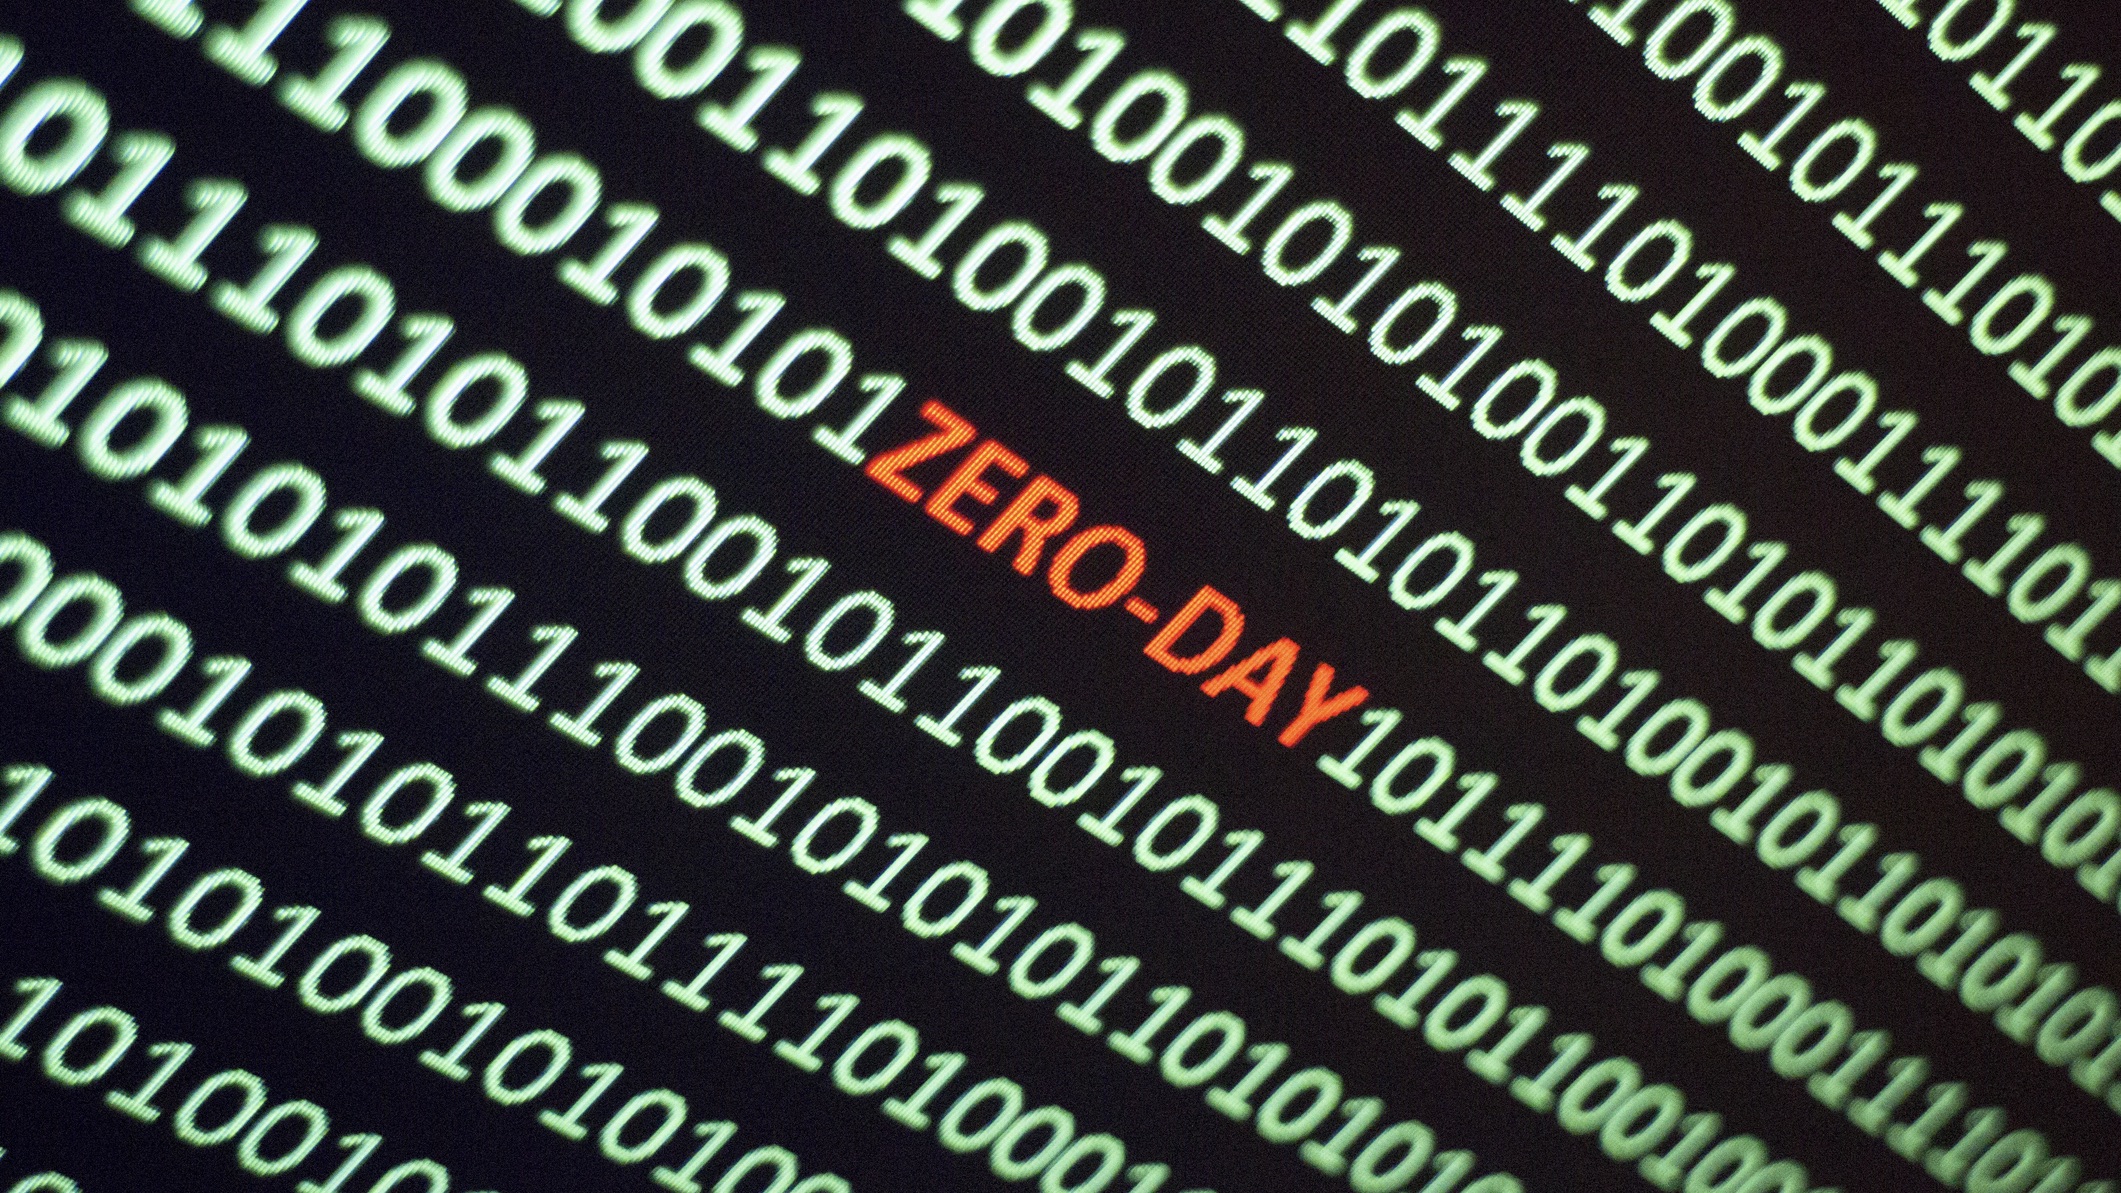 Zero-day exploits: How risky are they for companies?